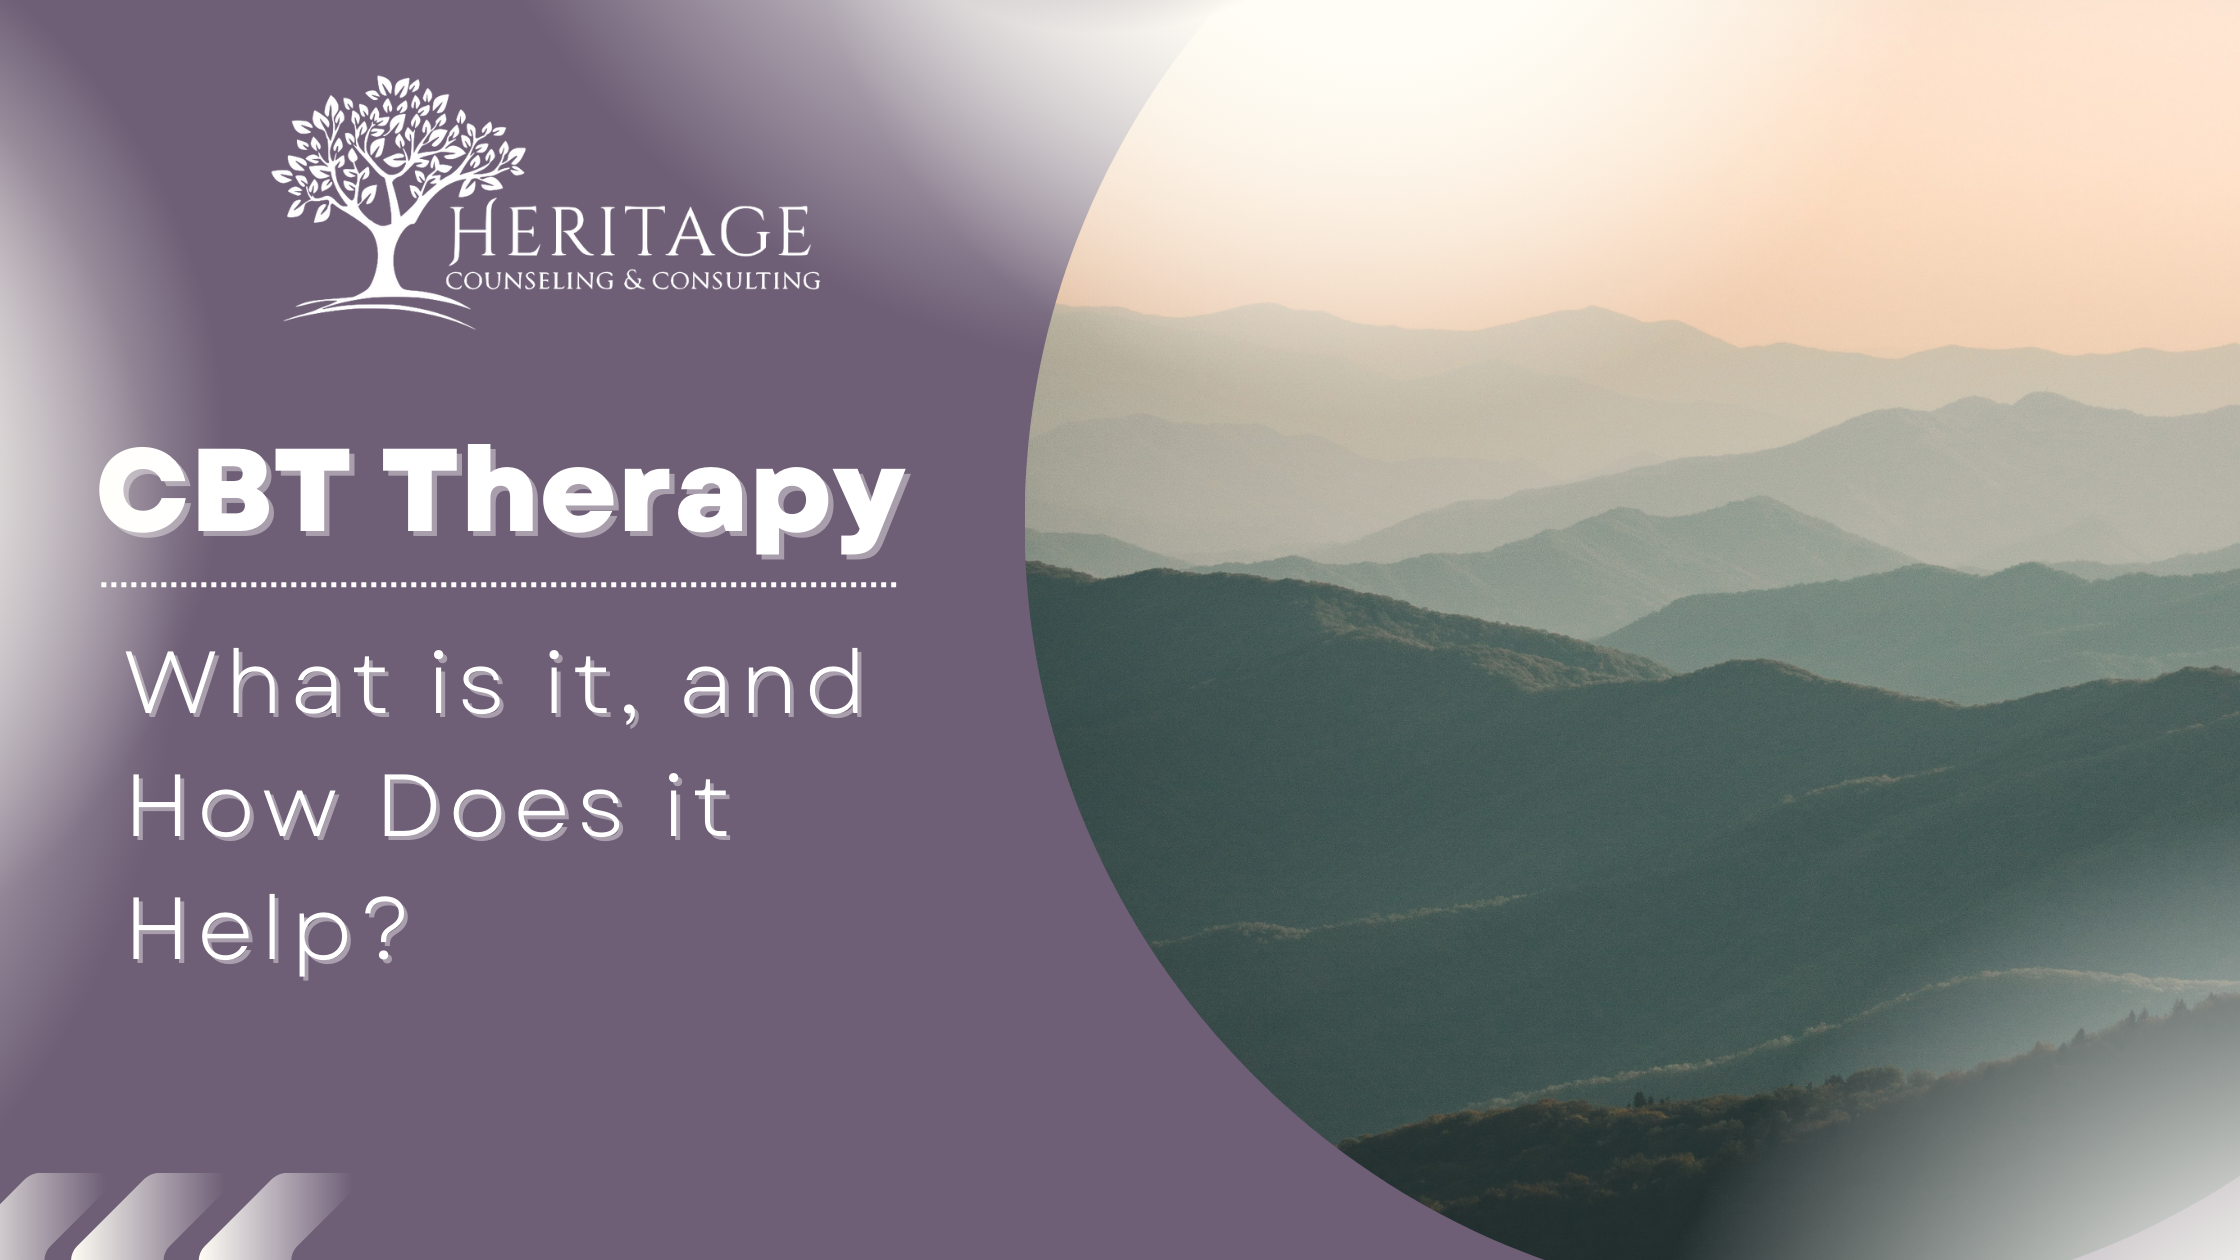 CBT Therapy - What is it, and How Does it Help?